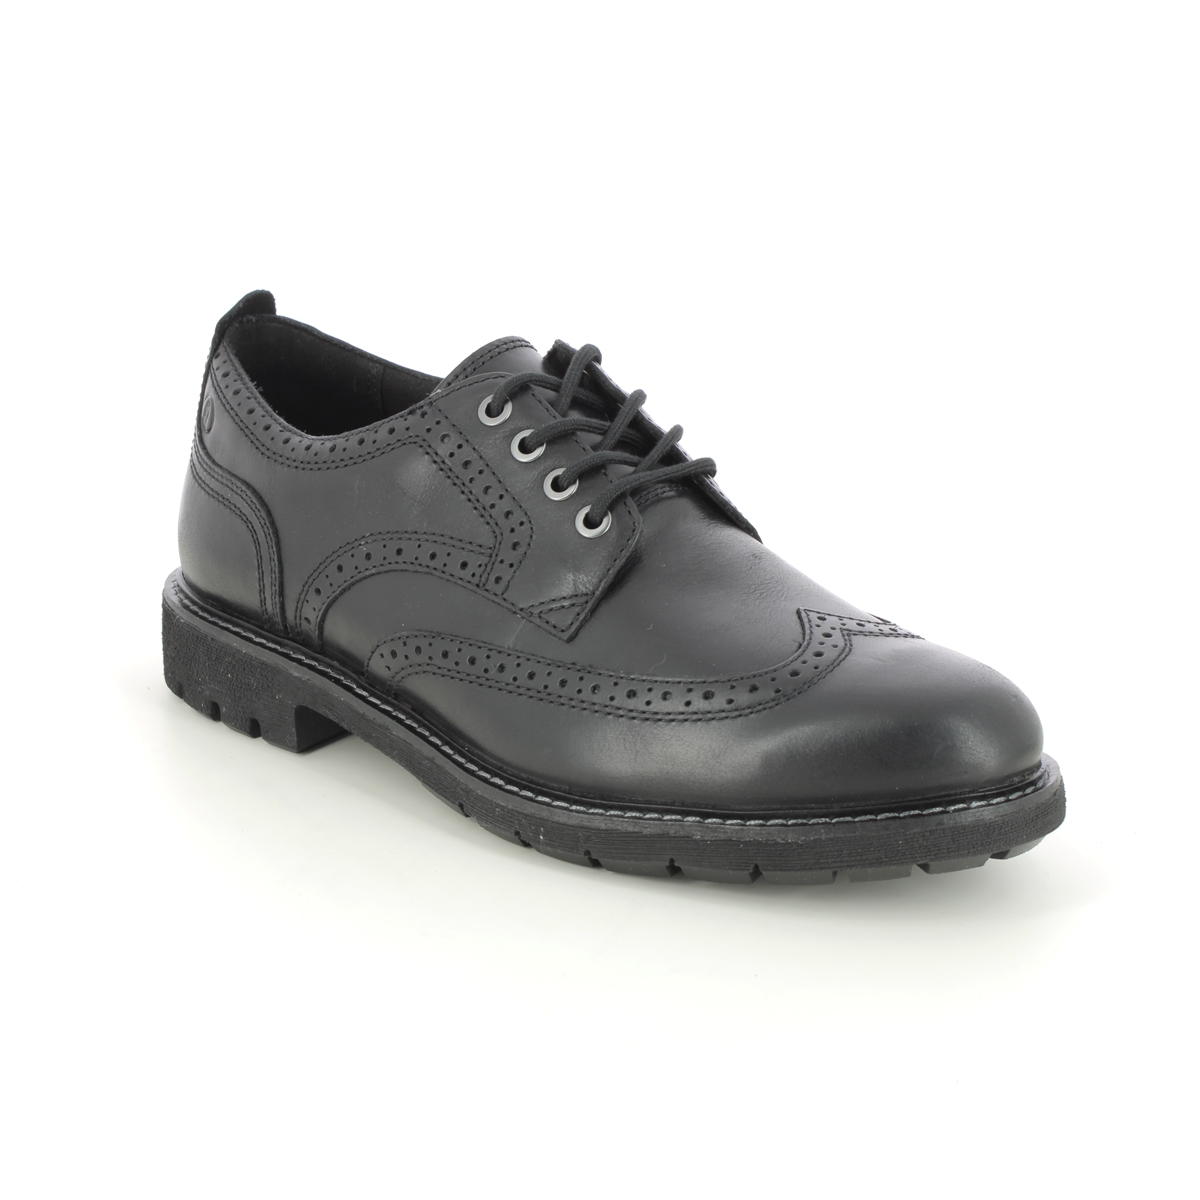 Clarks Batcombe Far Wing Black Leather Mens Brogues 734387G In Size 10 In Plain Black Leather G Width Fitting